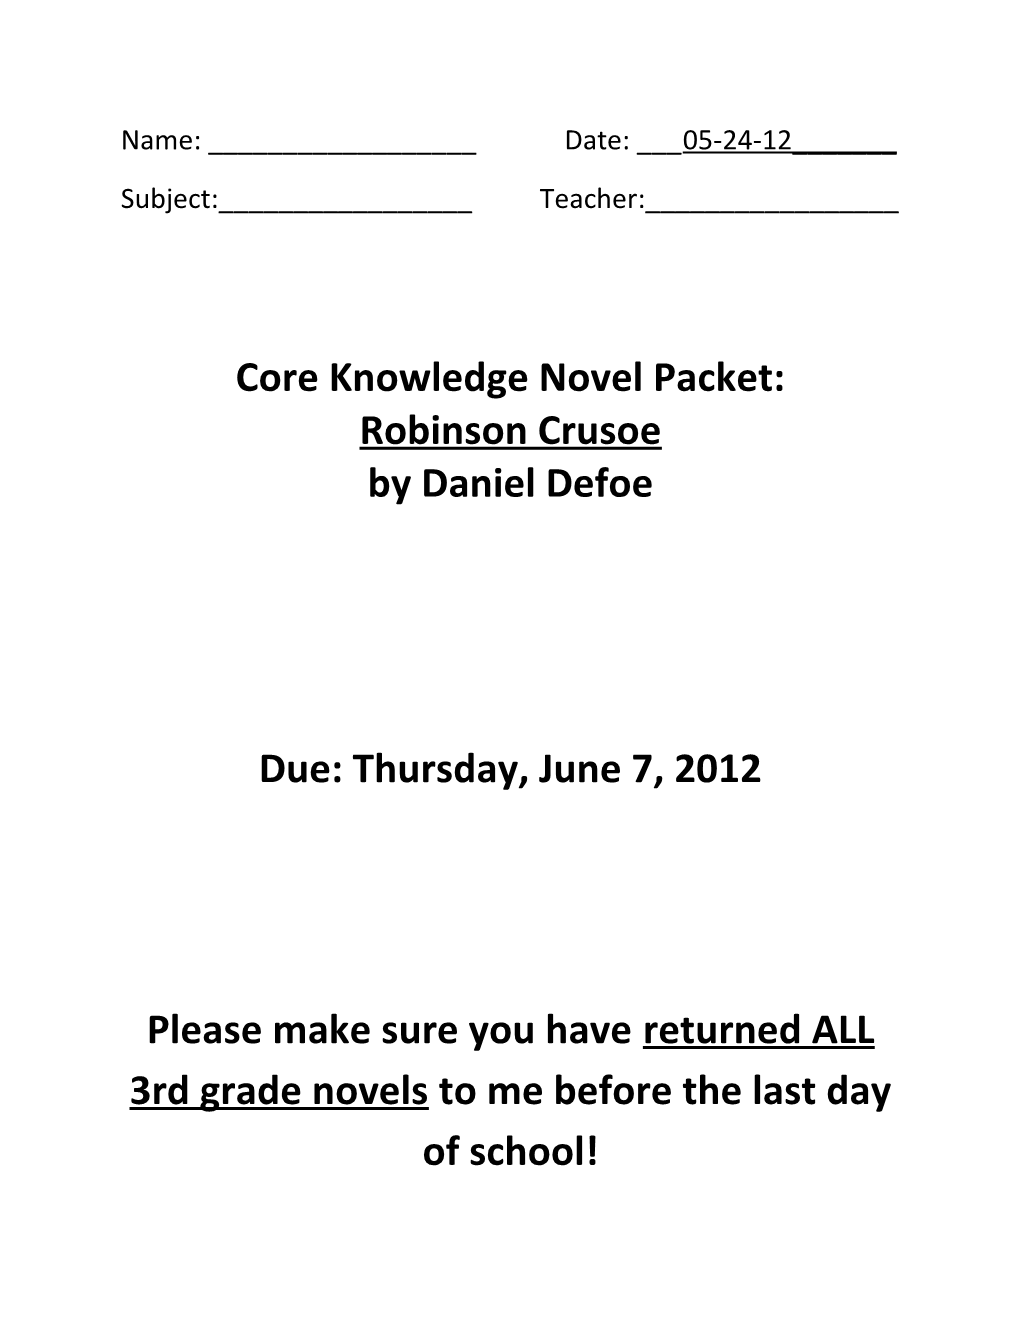 Core Knowledge Novel Packet